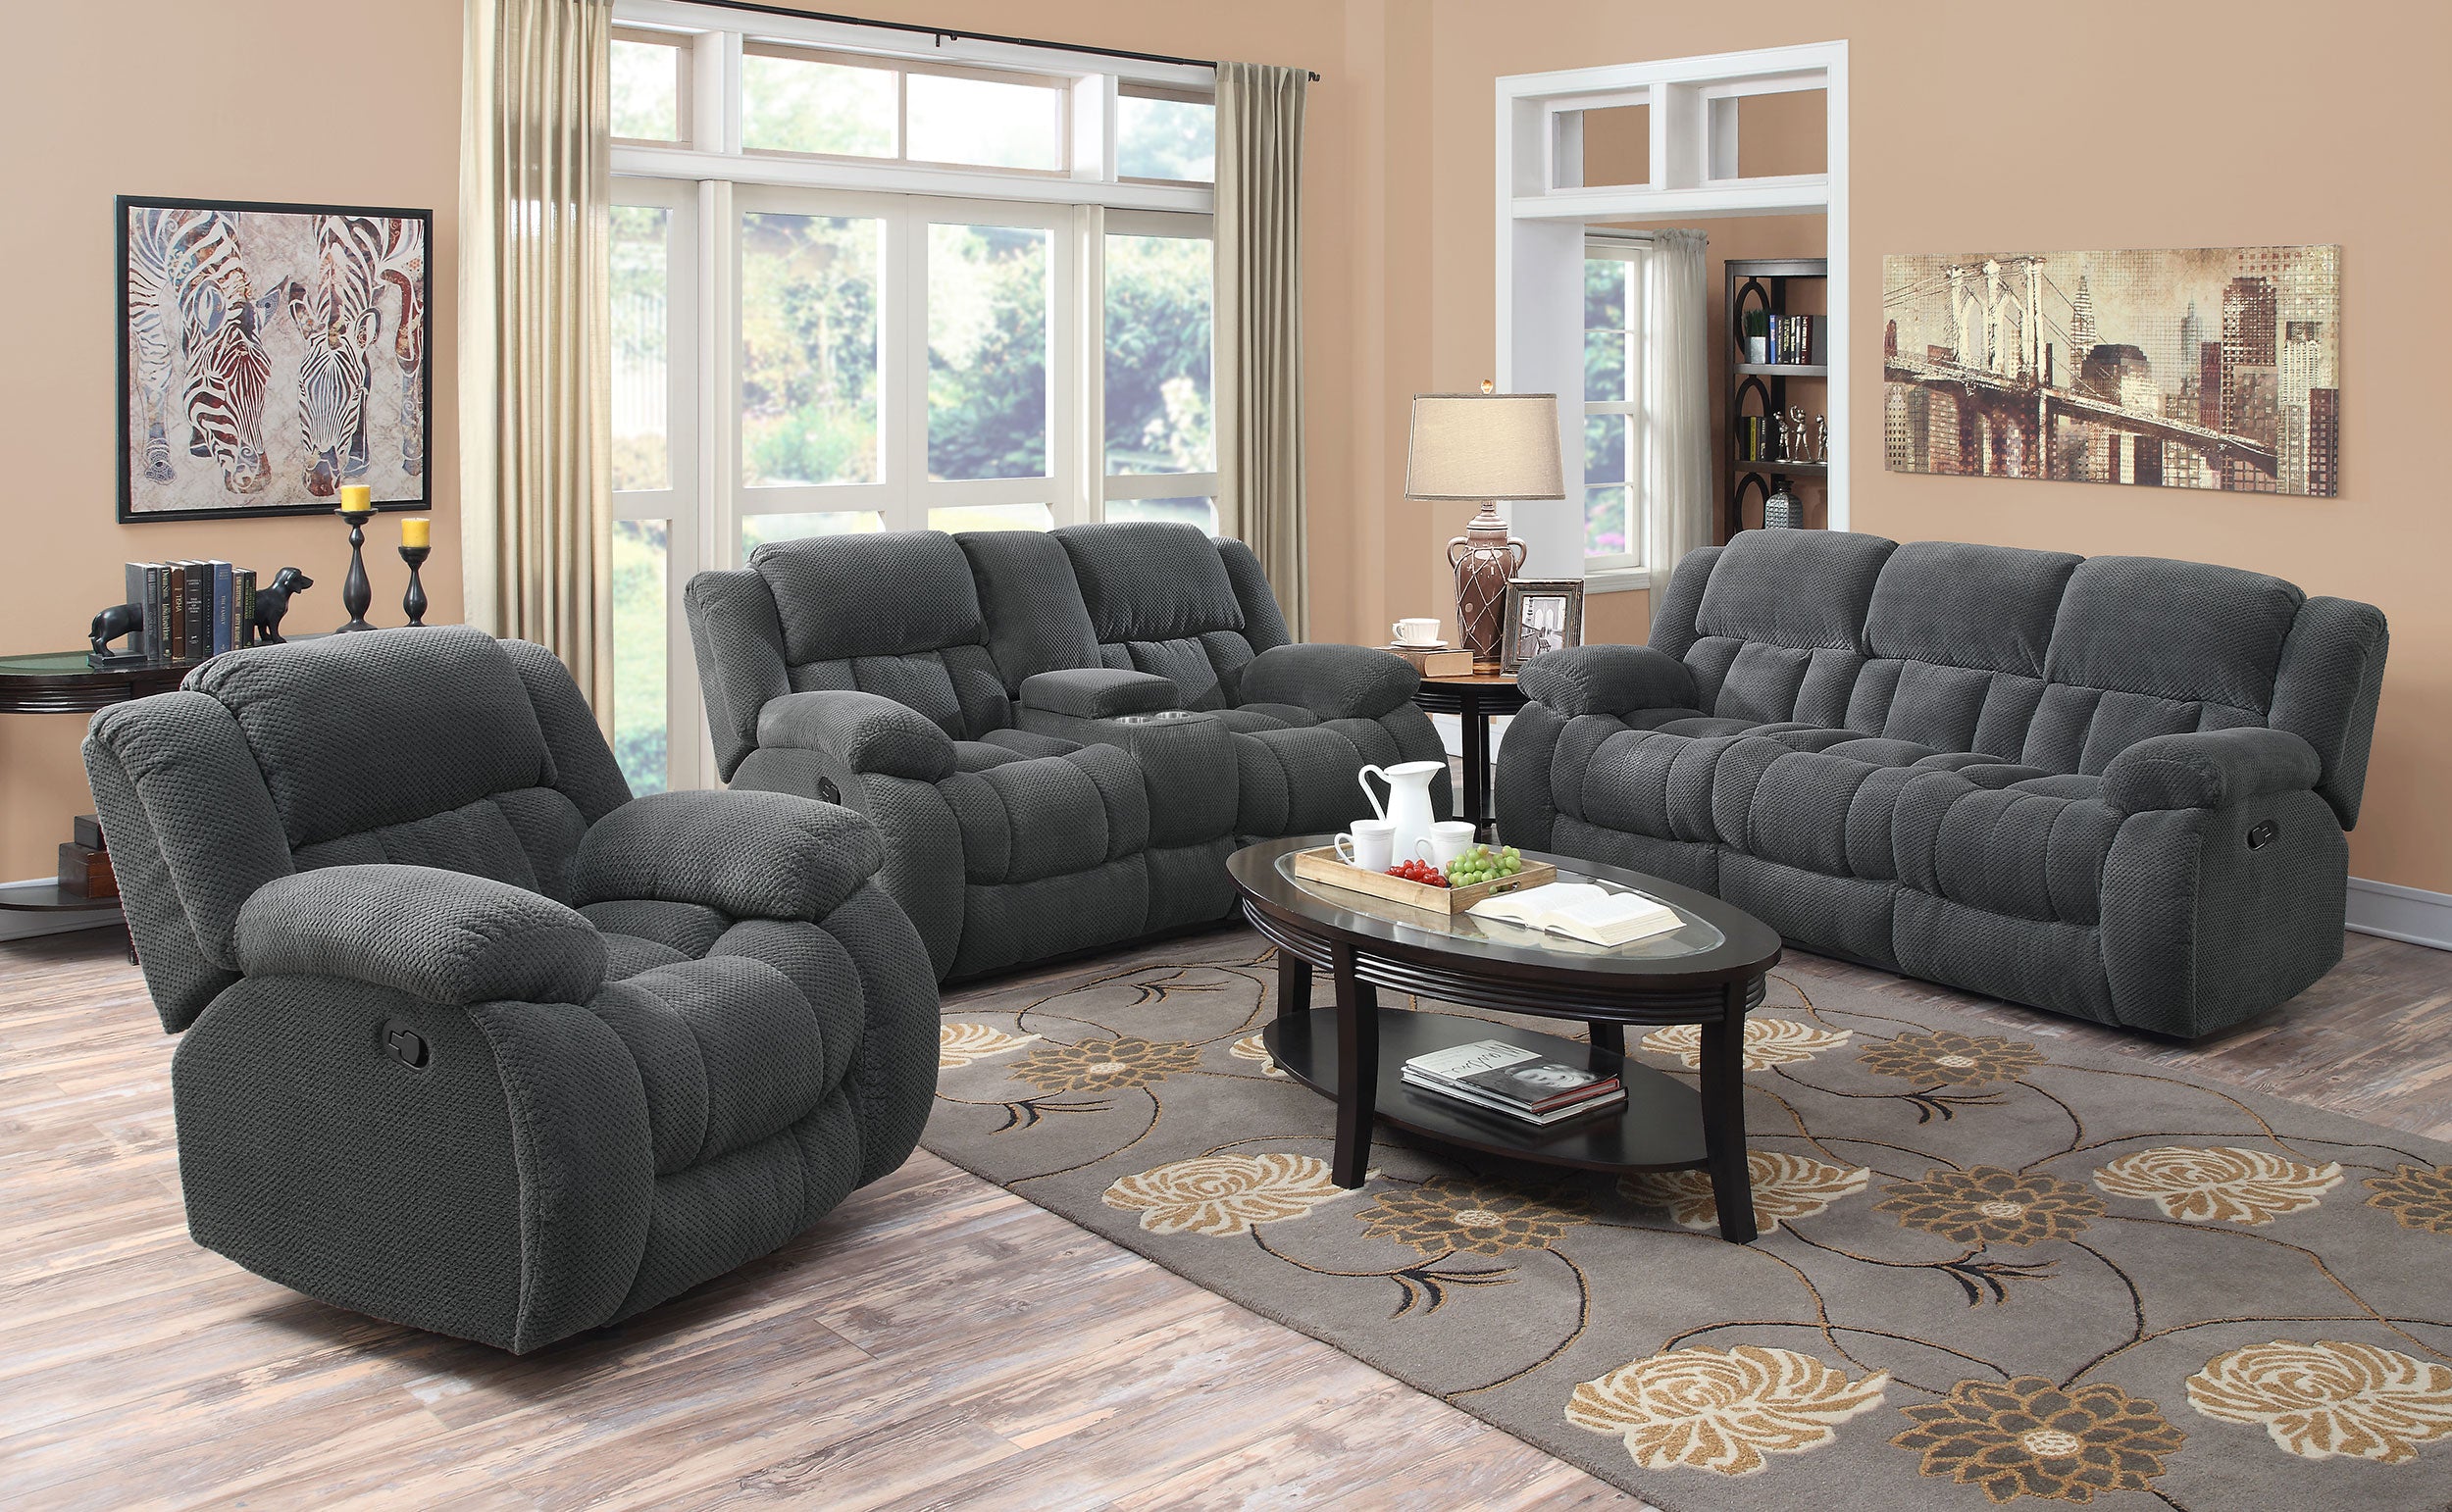 3 PC Weissman Upholstered Tufted Reclining Sofa Love Seat Recliner Living Room Set In Gray